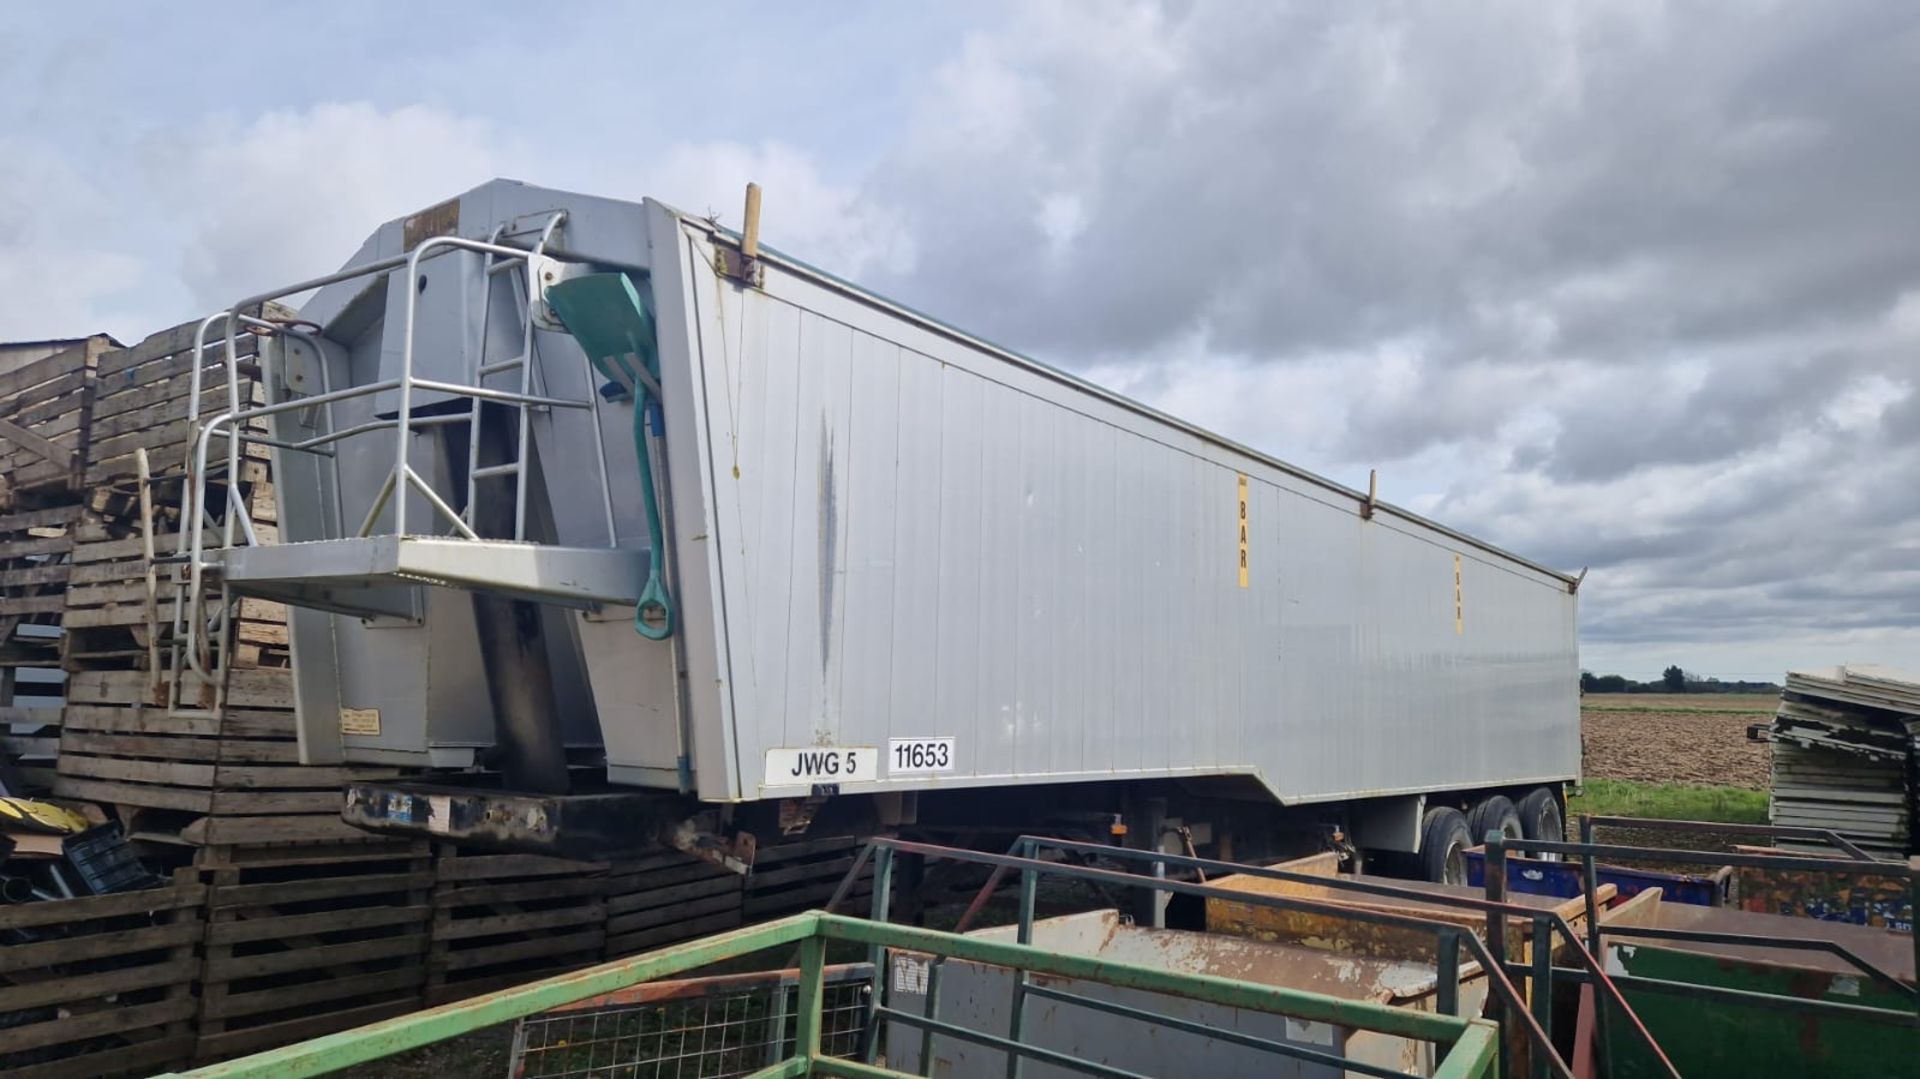 (09) SDC tri axle bulk tipper (JWG 5) aluminium body with roll over sheet serial SDCTP35R300105351 - Image 2 of 4